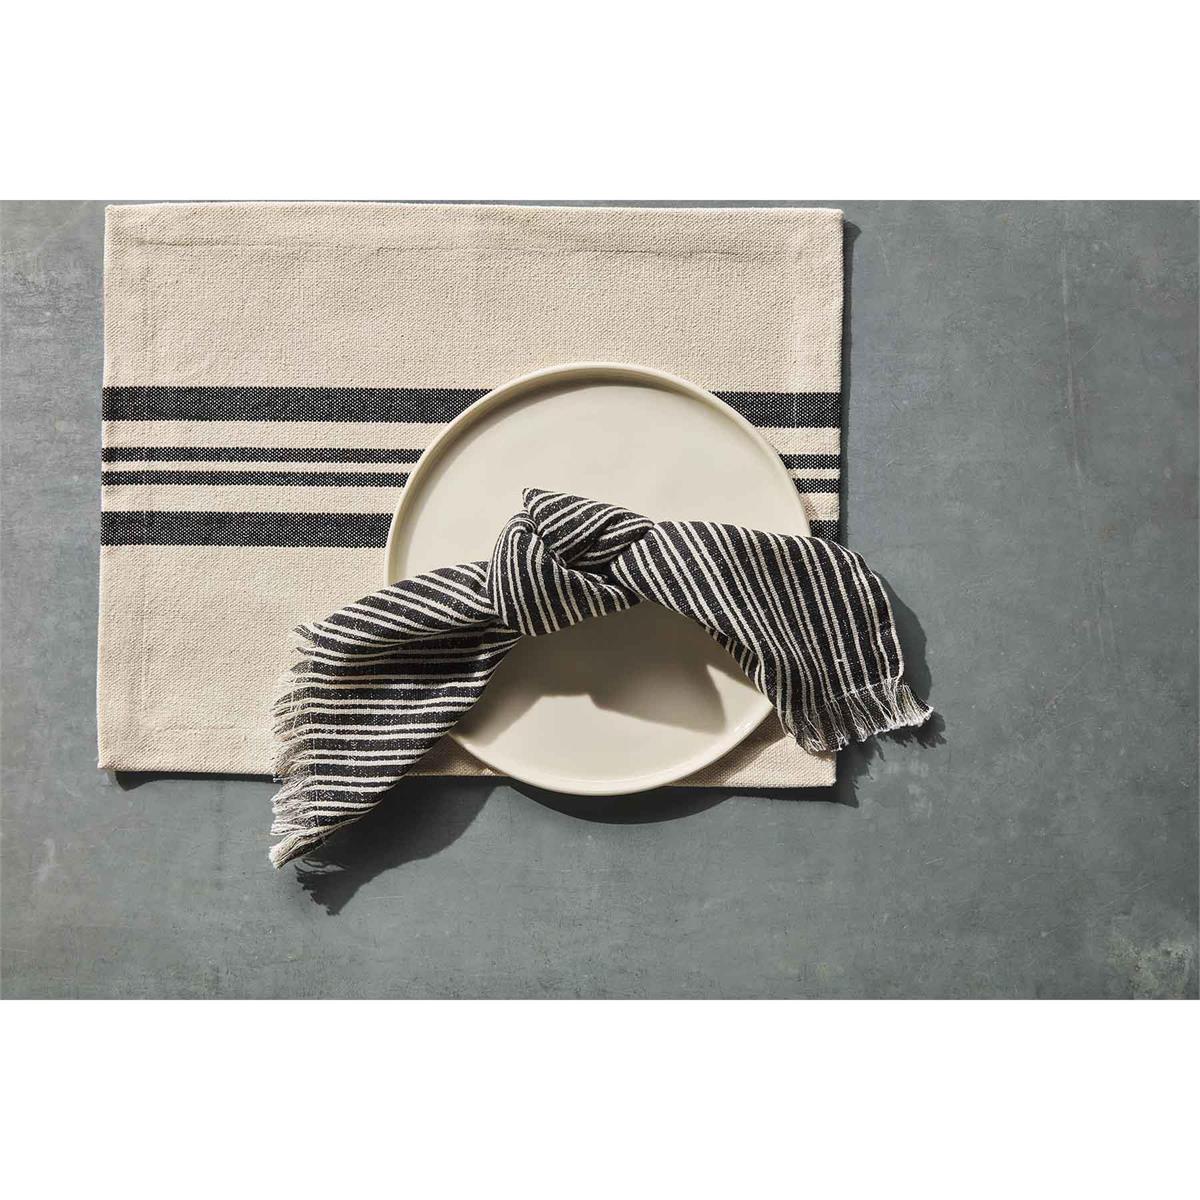 stripe napkin displayed with a dinner plate on top of a placemat sitting on a gray surface